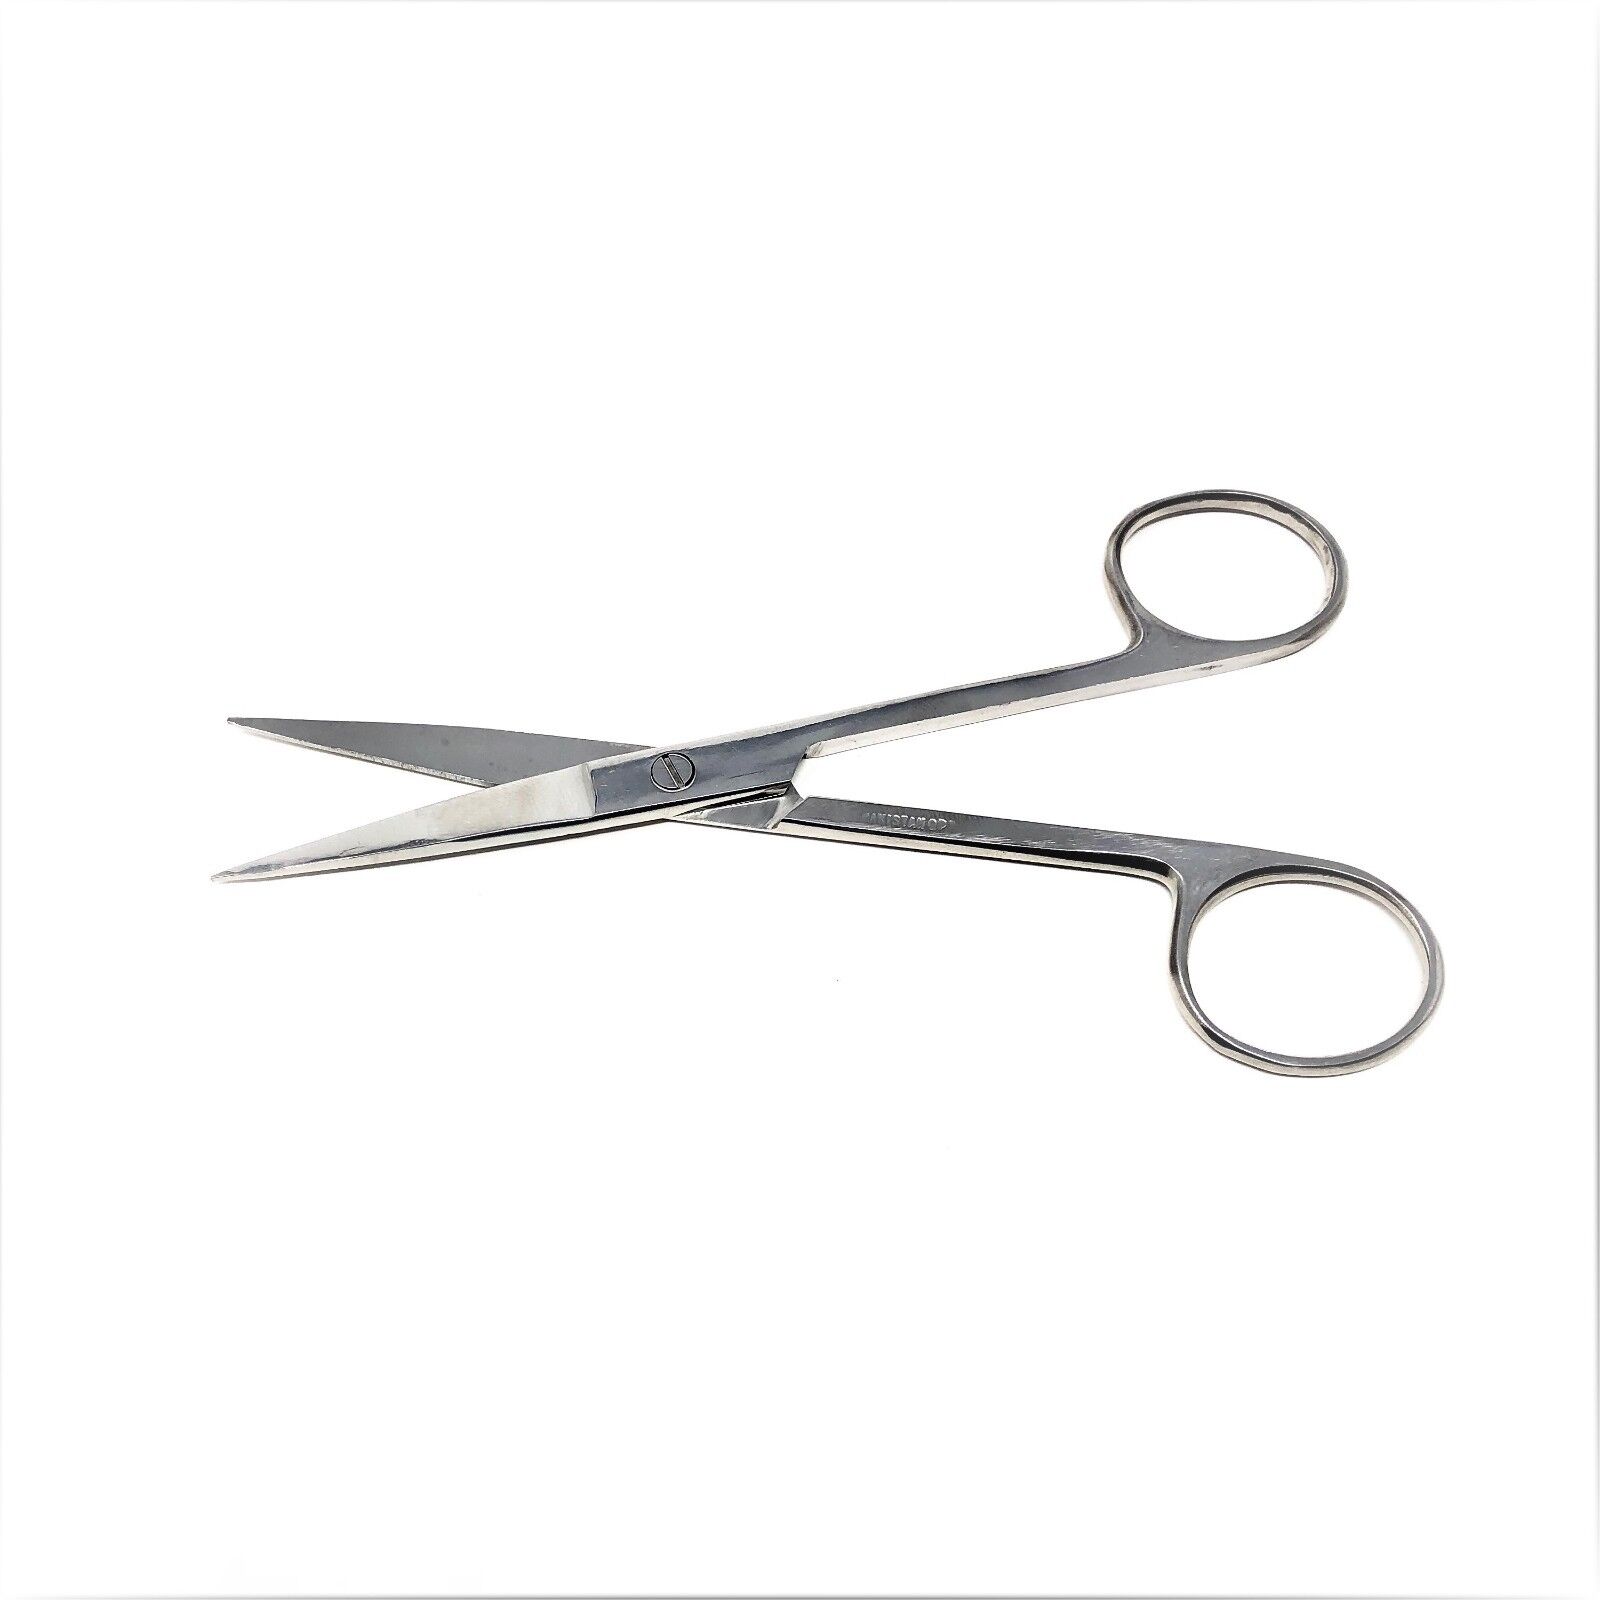 1 PC Surgical Medical Operating Scissors Straight 6.5\